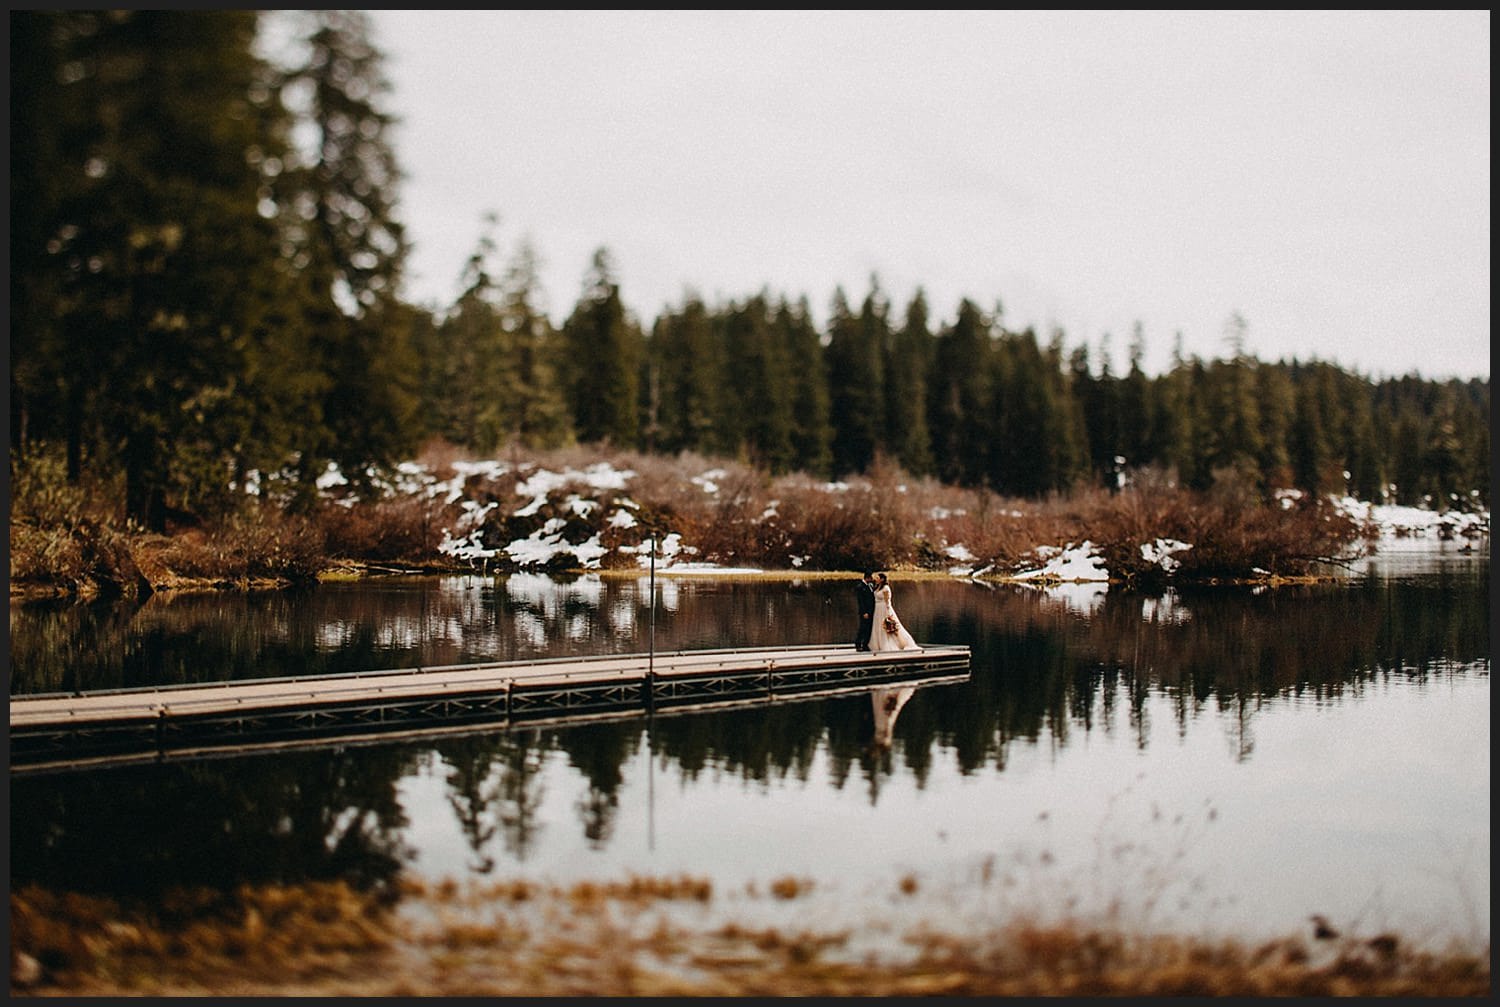 beautiful couple reflection in lake for their wedding Mckenzie river wedding at Clear lake